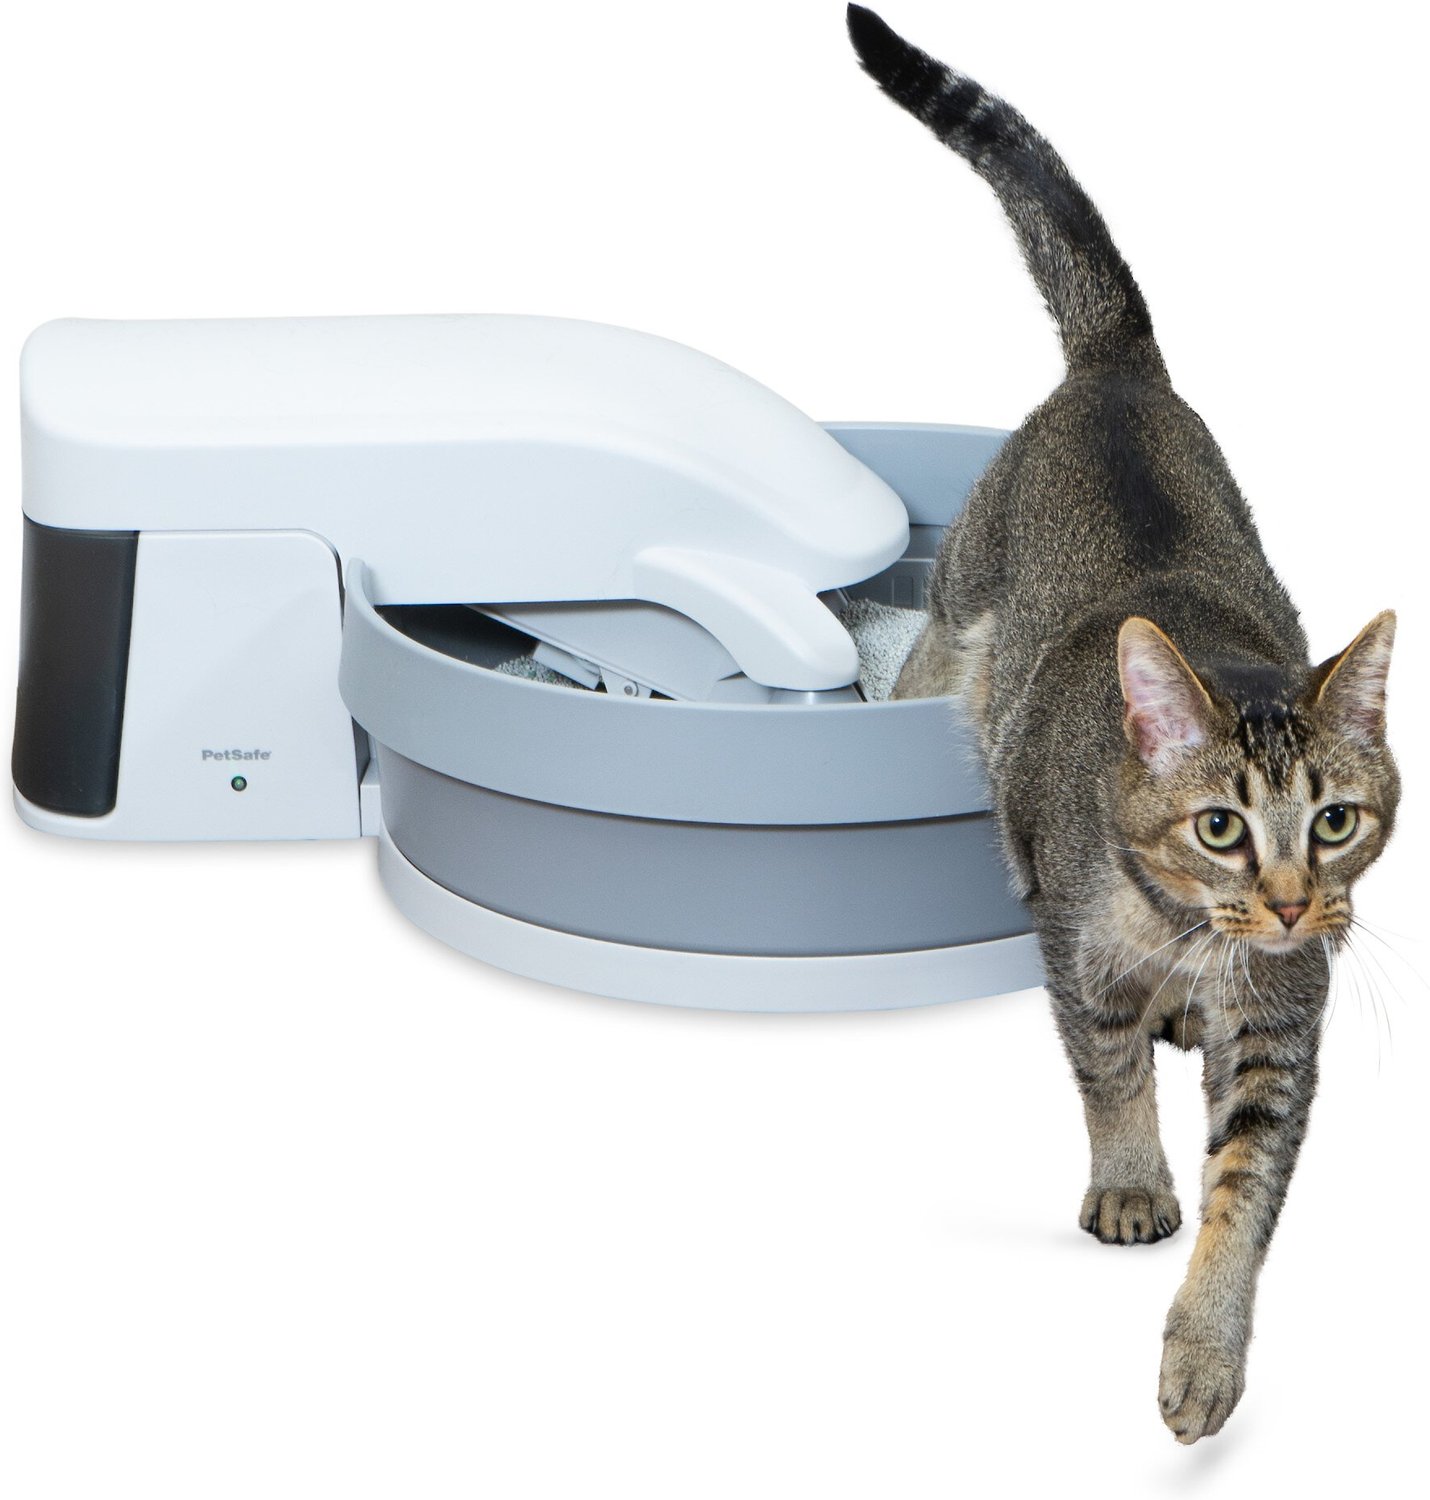 PetSafe Simply Clean SelfCleaning Litter Box